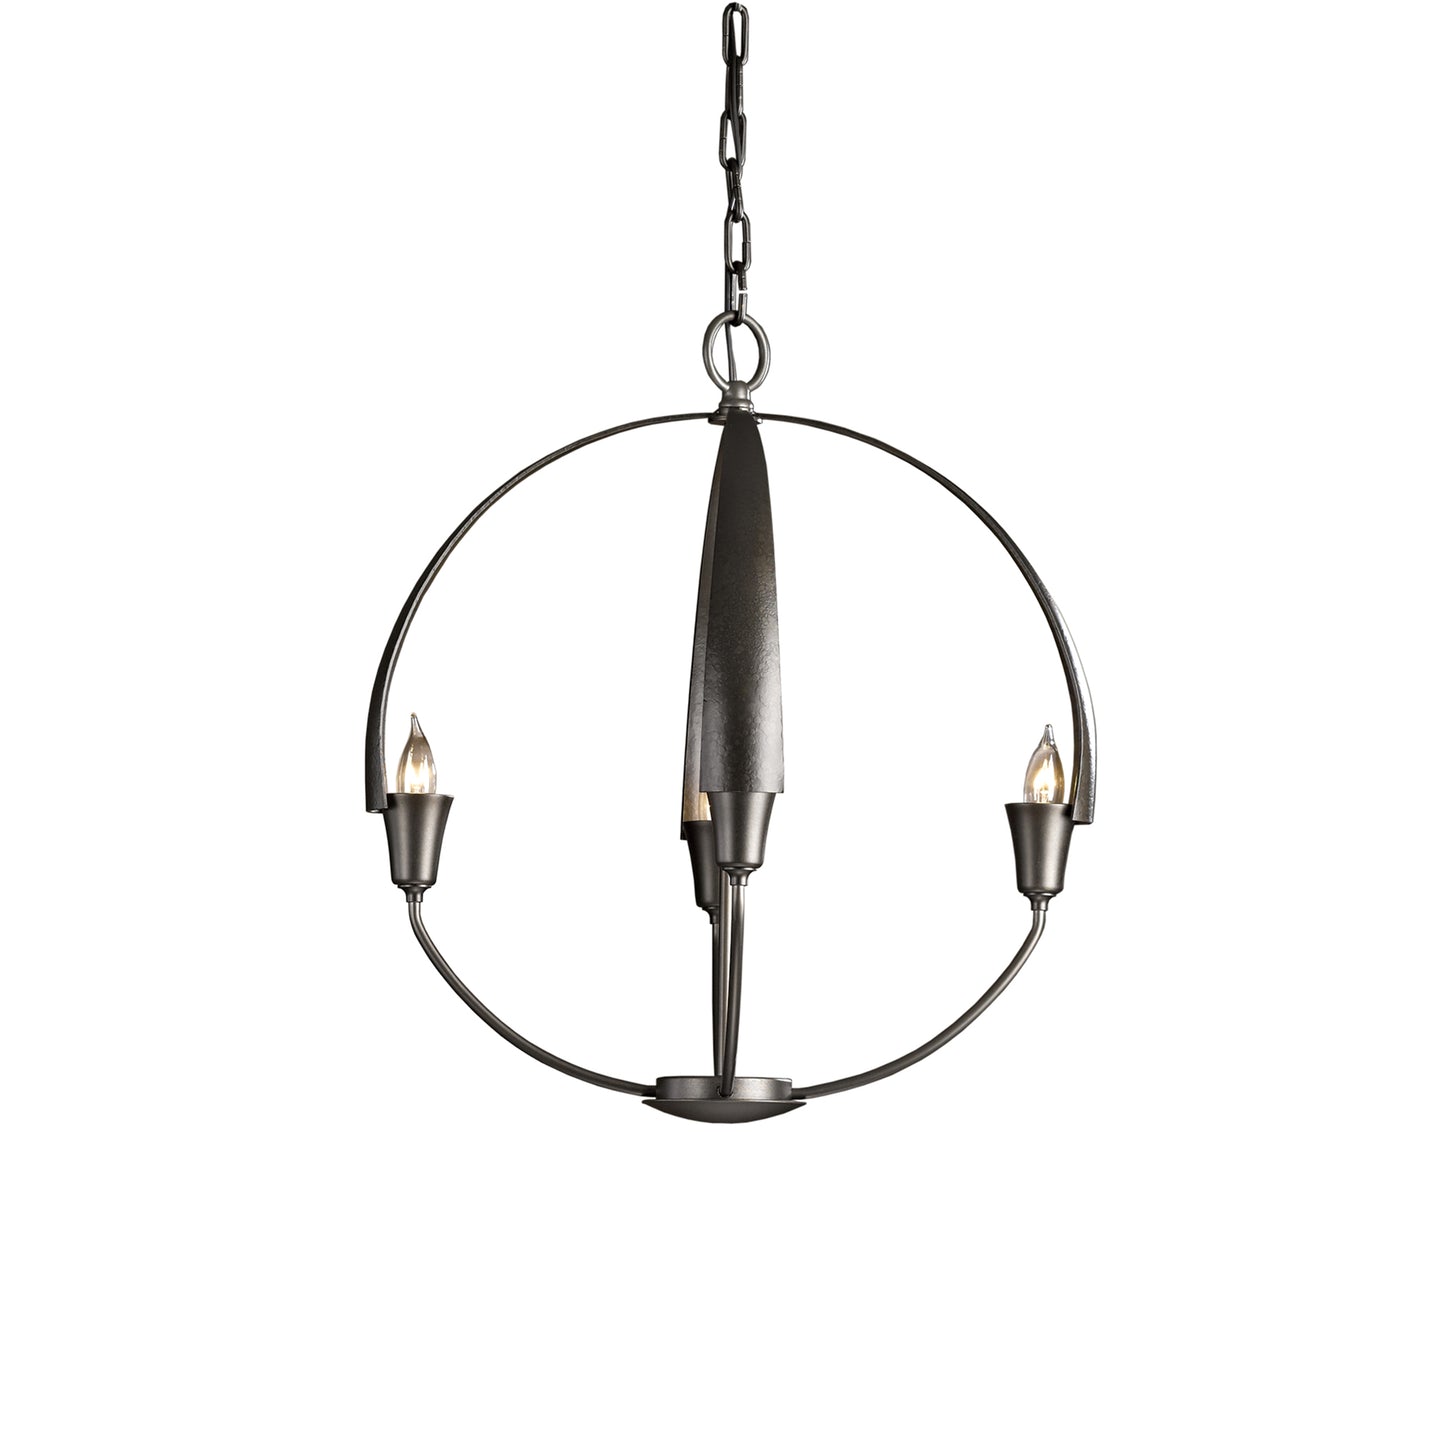 The Hubbardton Forge Cirque Chandelier, handcrafted in Vermont, offers stunning illumination with its sleek black metal design and three candle holders.